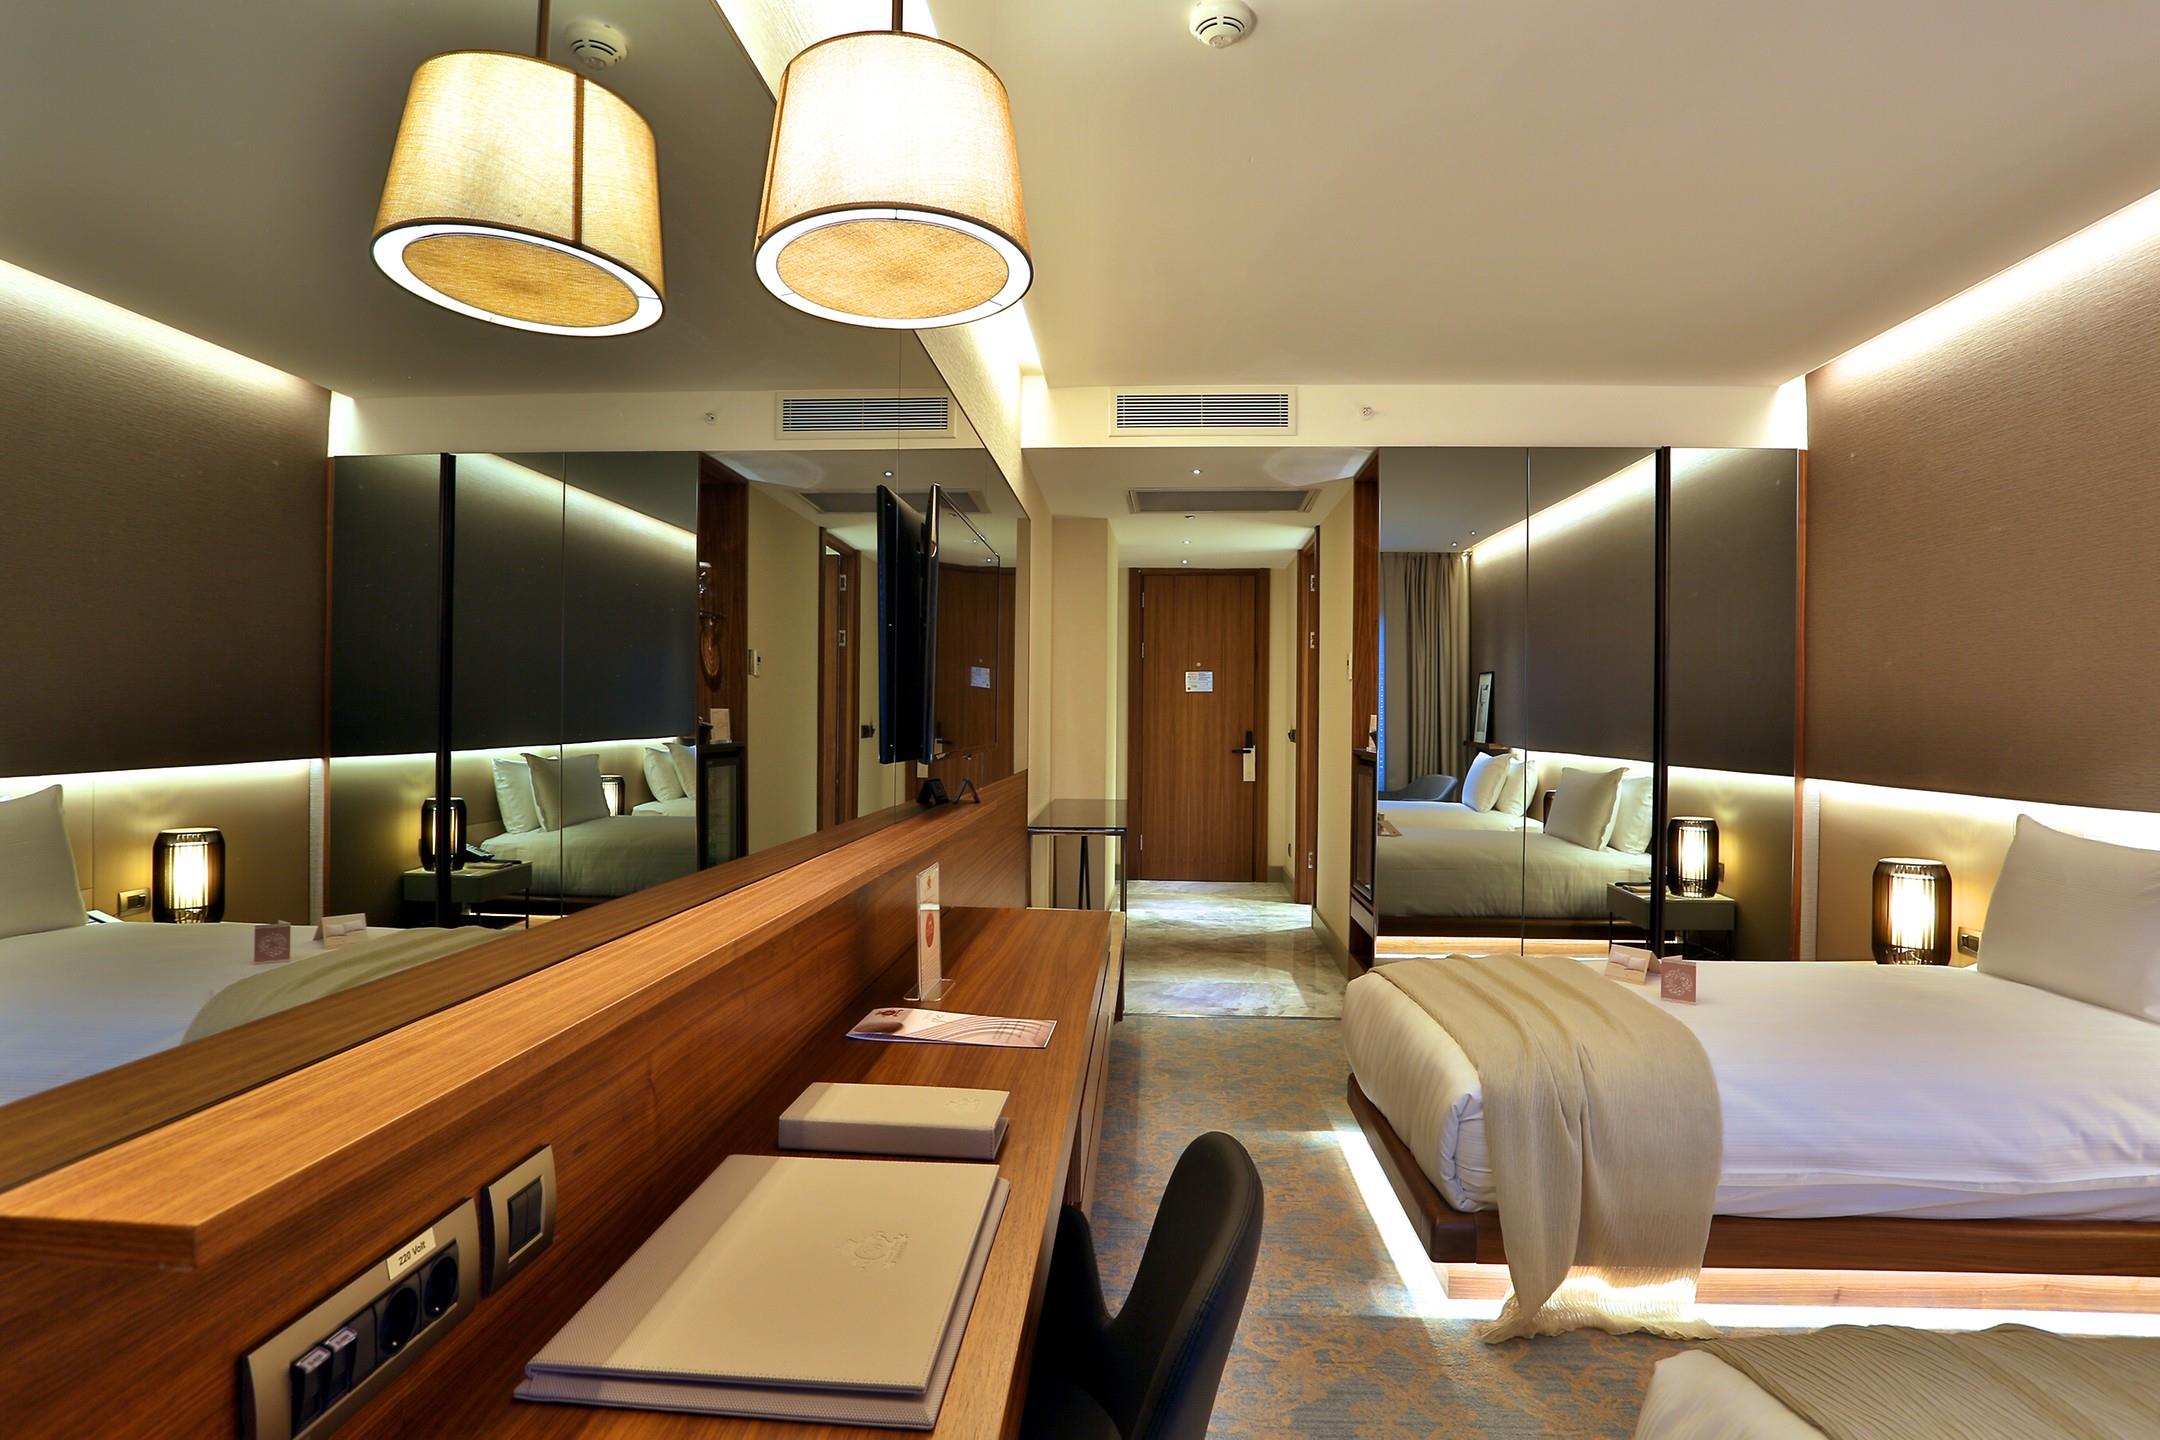 Connected rooms. Стамбул (Фатих) / Istanbul (Fatih) Dosso Dossi Hotel Spa Downtown 5. Отель Dosso Dossi Downtown. Dosso Dossi Hotels Spa Downtown 5. Dosso Dossi Hotels & Spa Downtown 5* (Fatih).